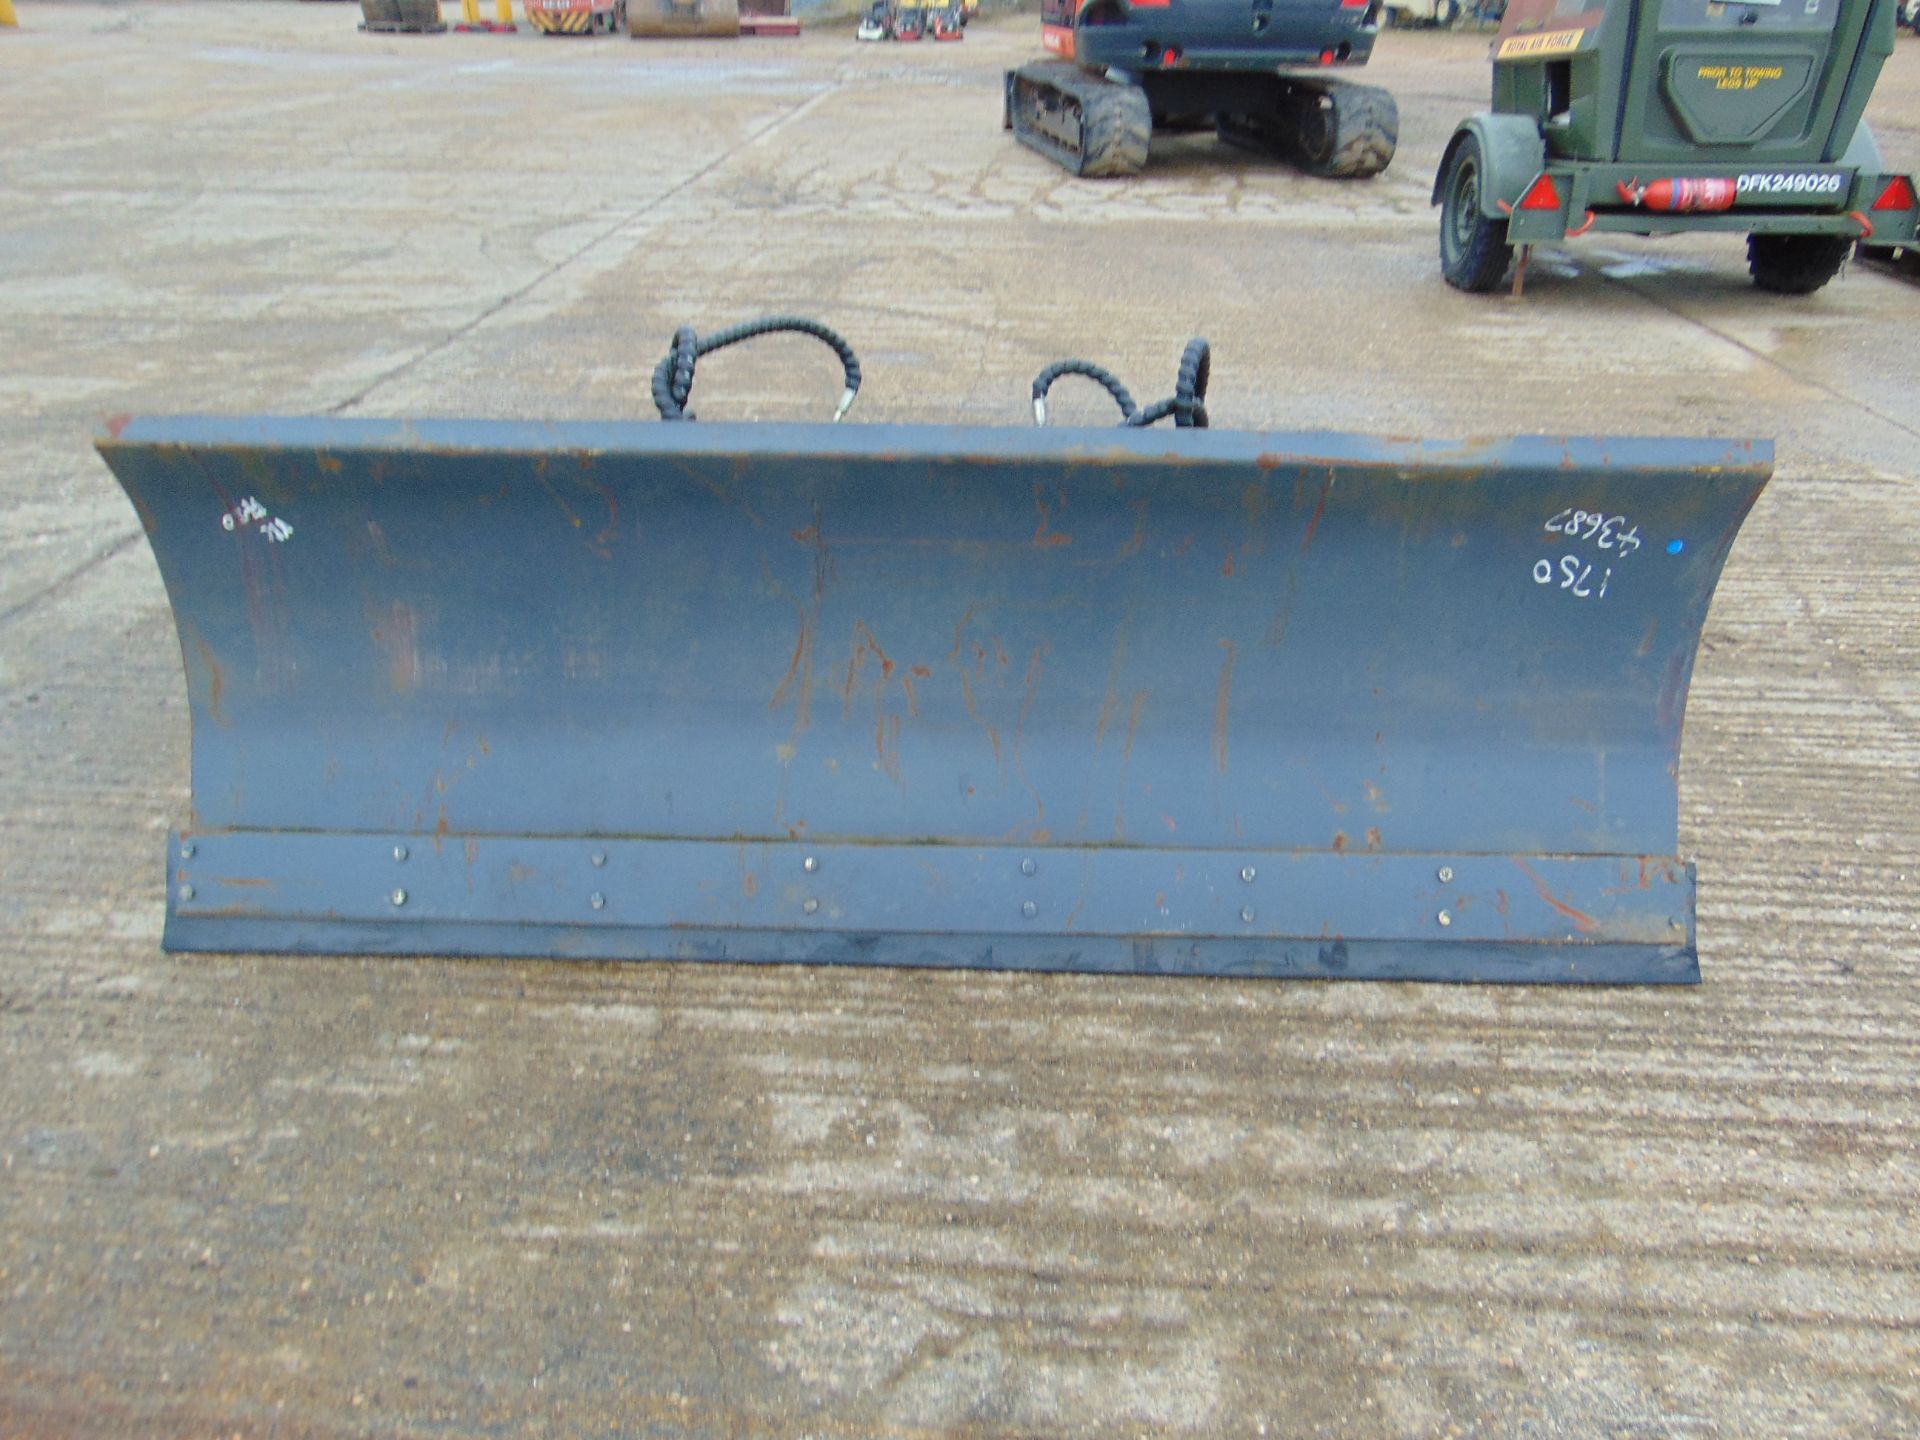 Unissued 7' Hydraulic Snow Plough Blade for Telehandler, Forklift, Tractor Etc - Image 2 of 6